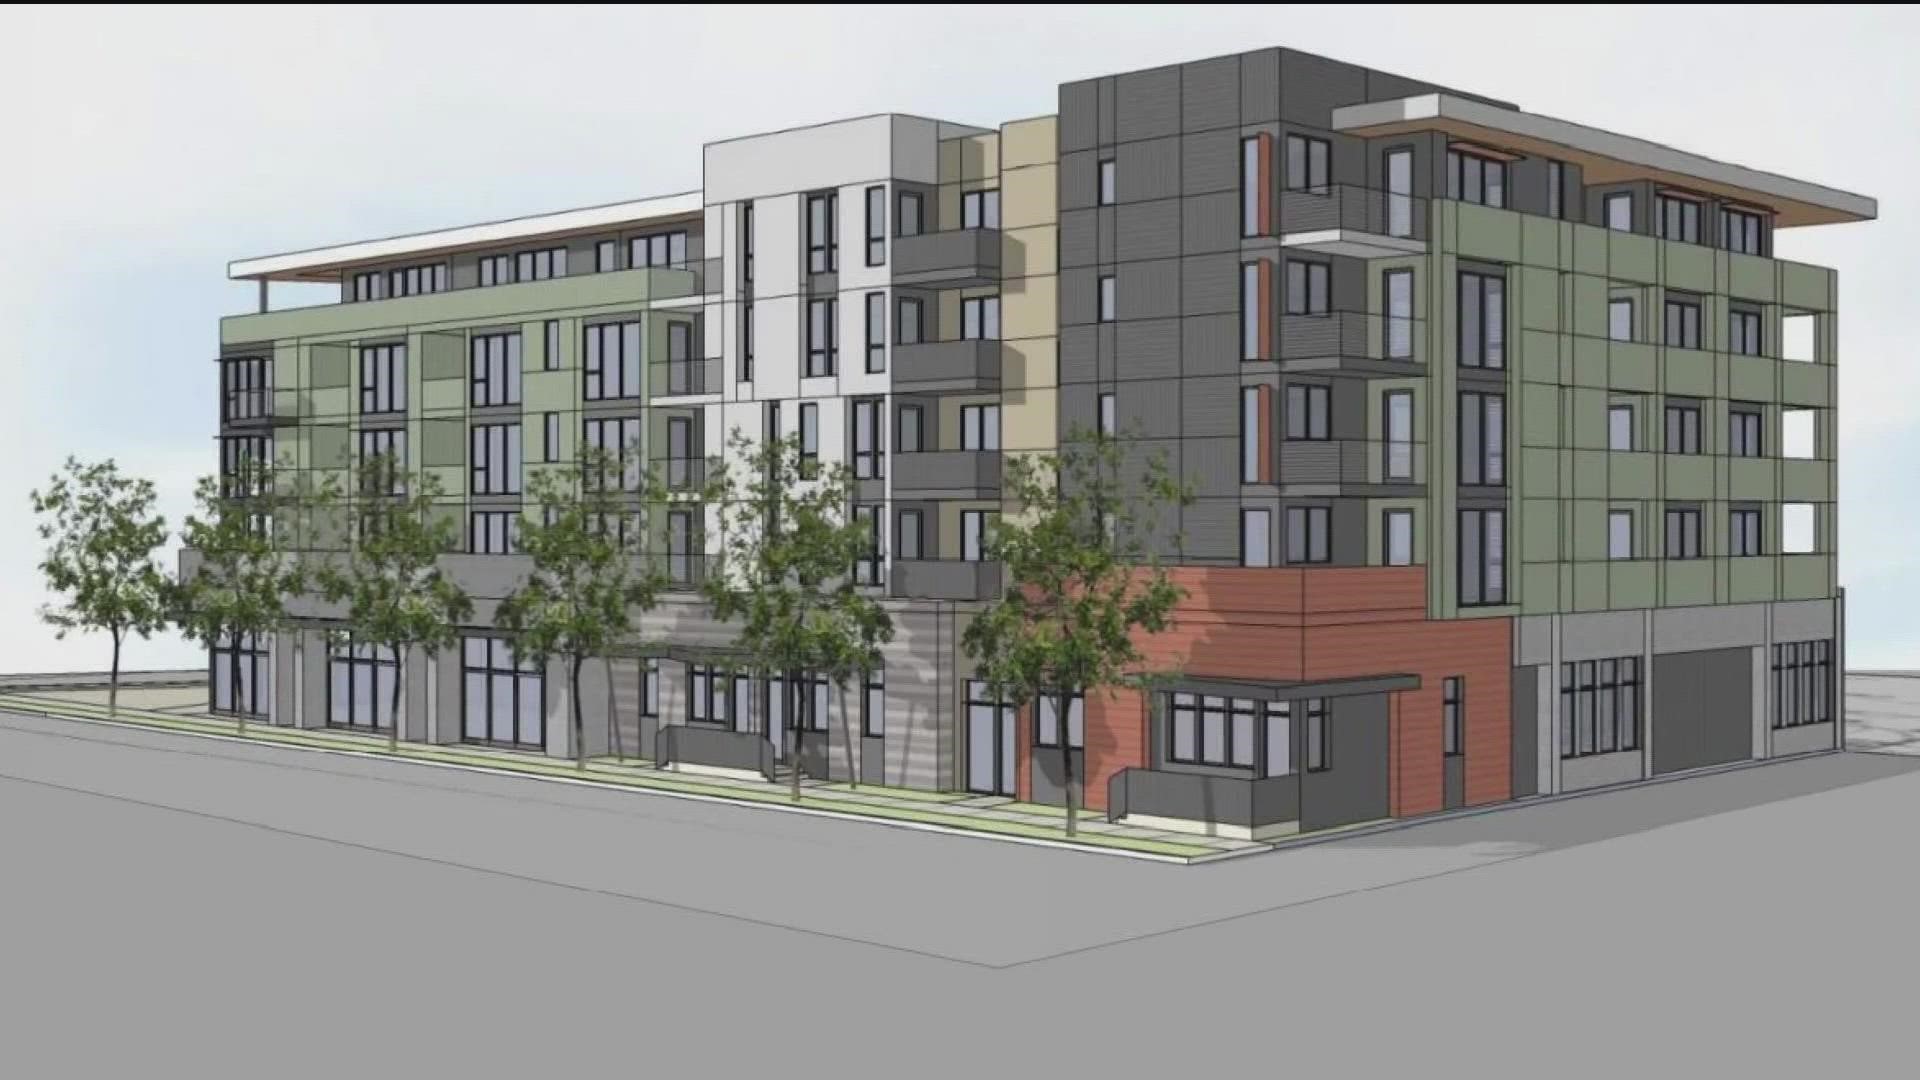 A five-story apartment building proposed for Downtown La Mesa is drawing opposition from people who say it wouldn't fit in with the surrounding area.